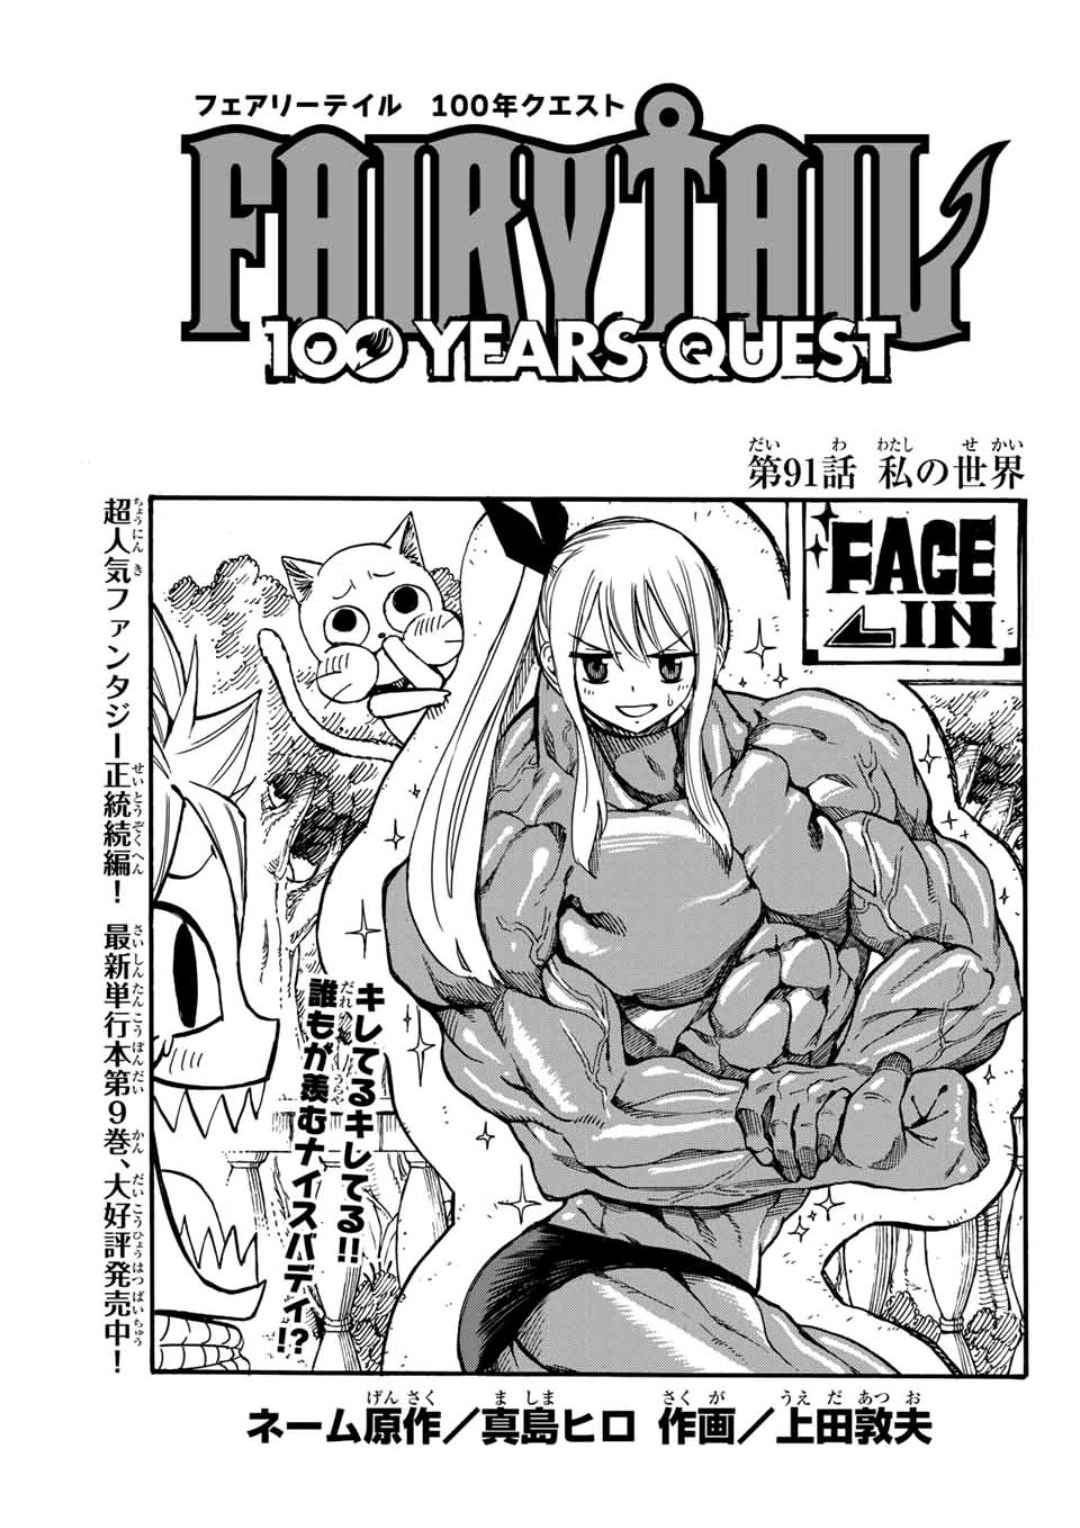 Fairy Tail 100 Years Quest Chapter 91 Fairy Tail Wiki Fandom